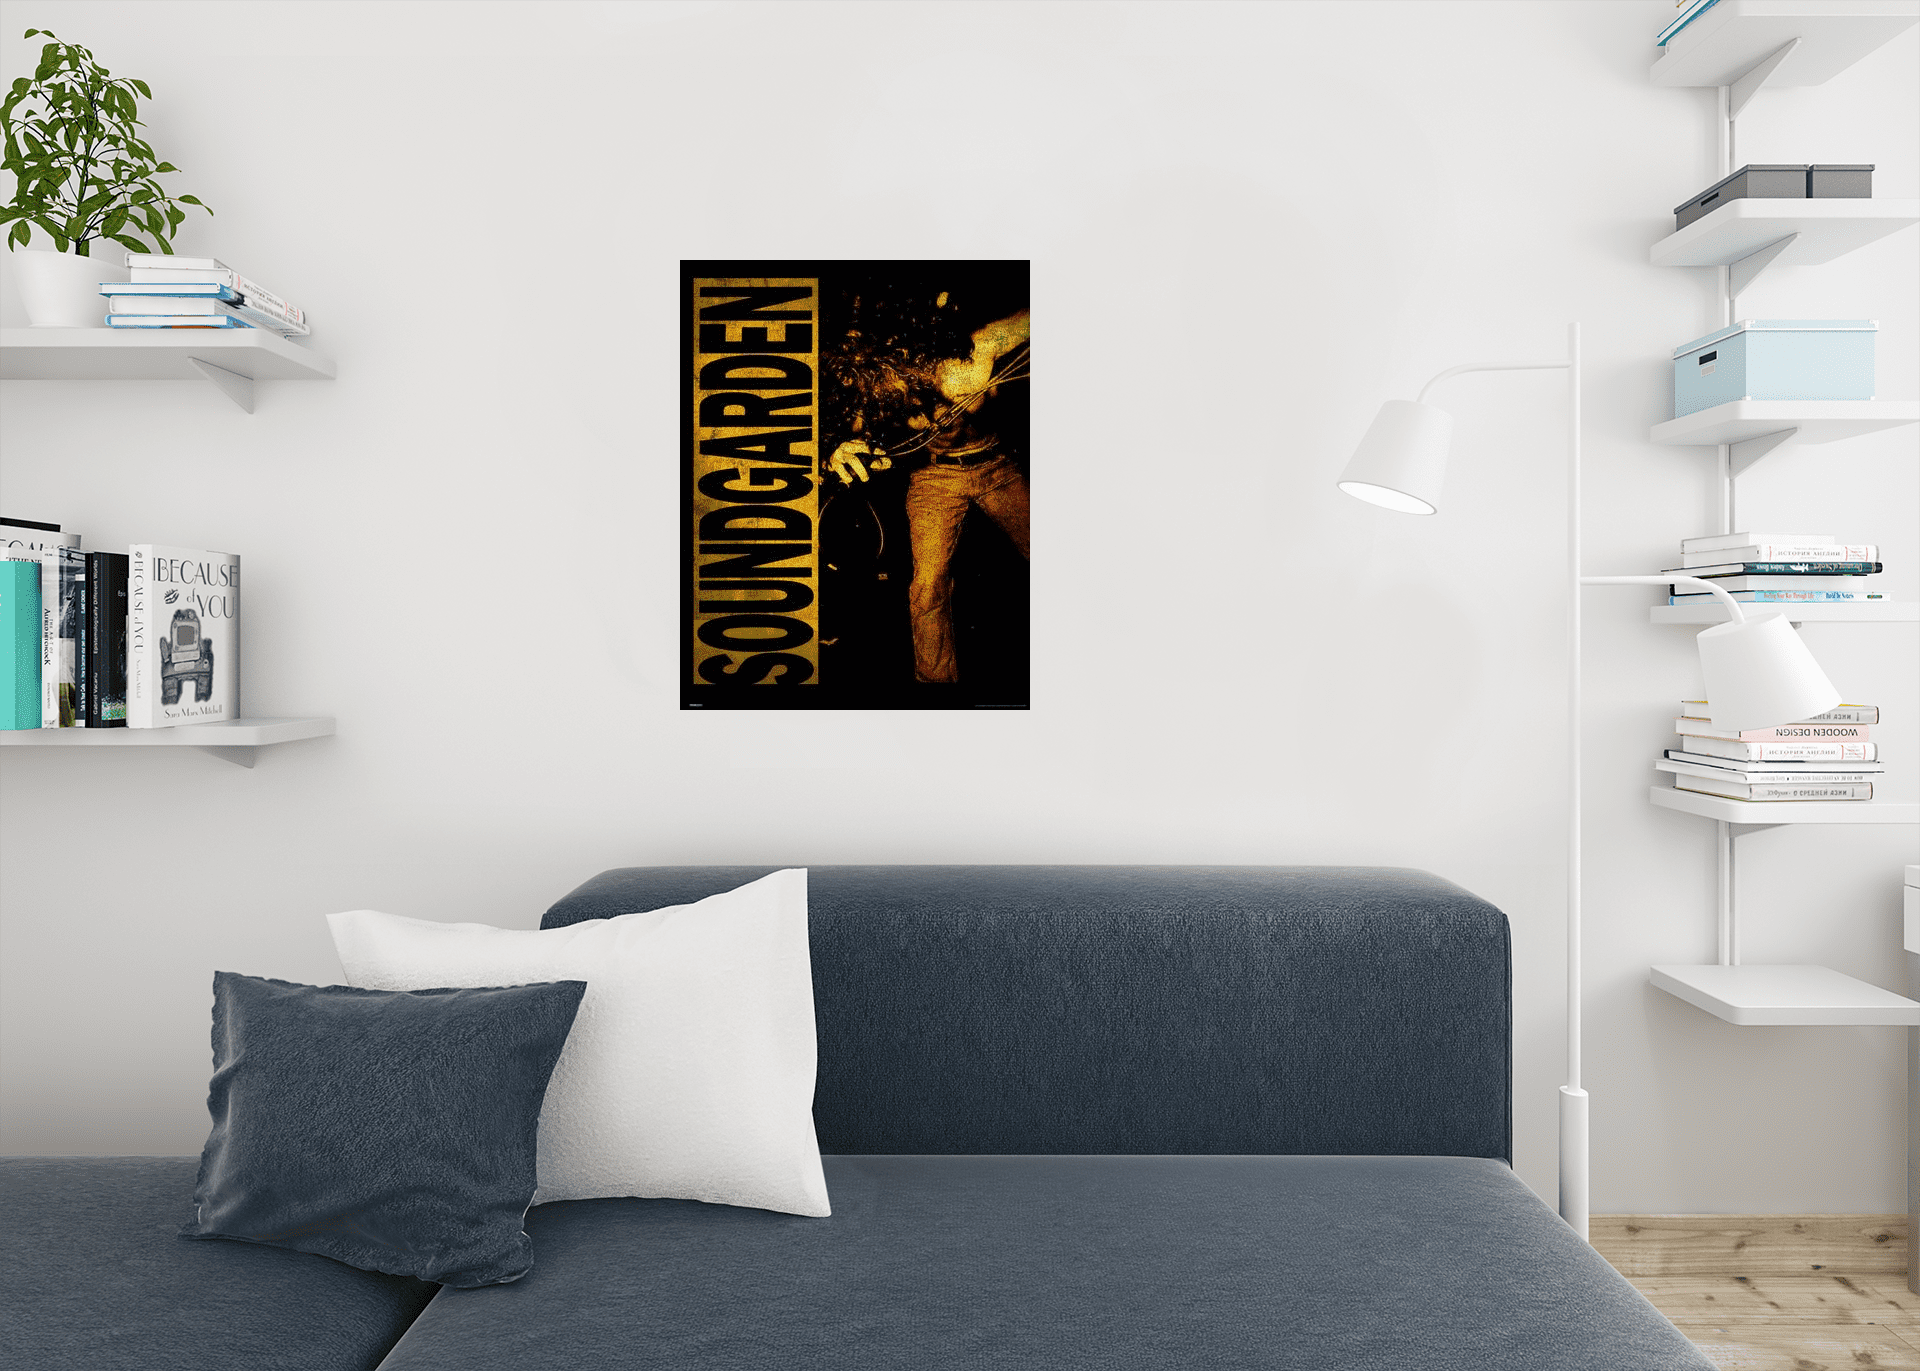 SOUNDGARDEN LOUDER THAN LOVE POSTER PRINT 24x36 NEW FREE SHIPPING 